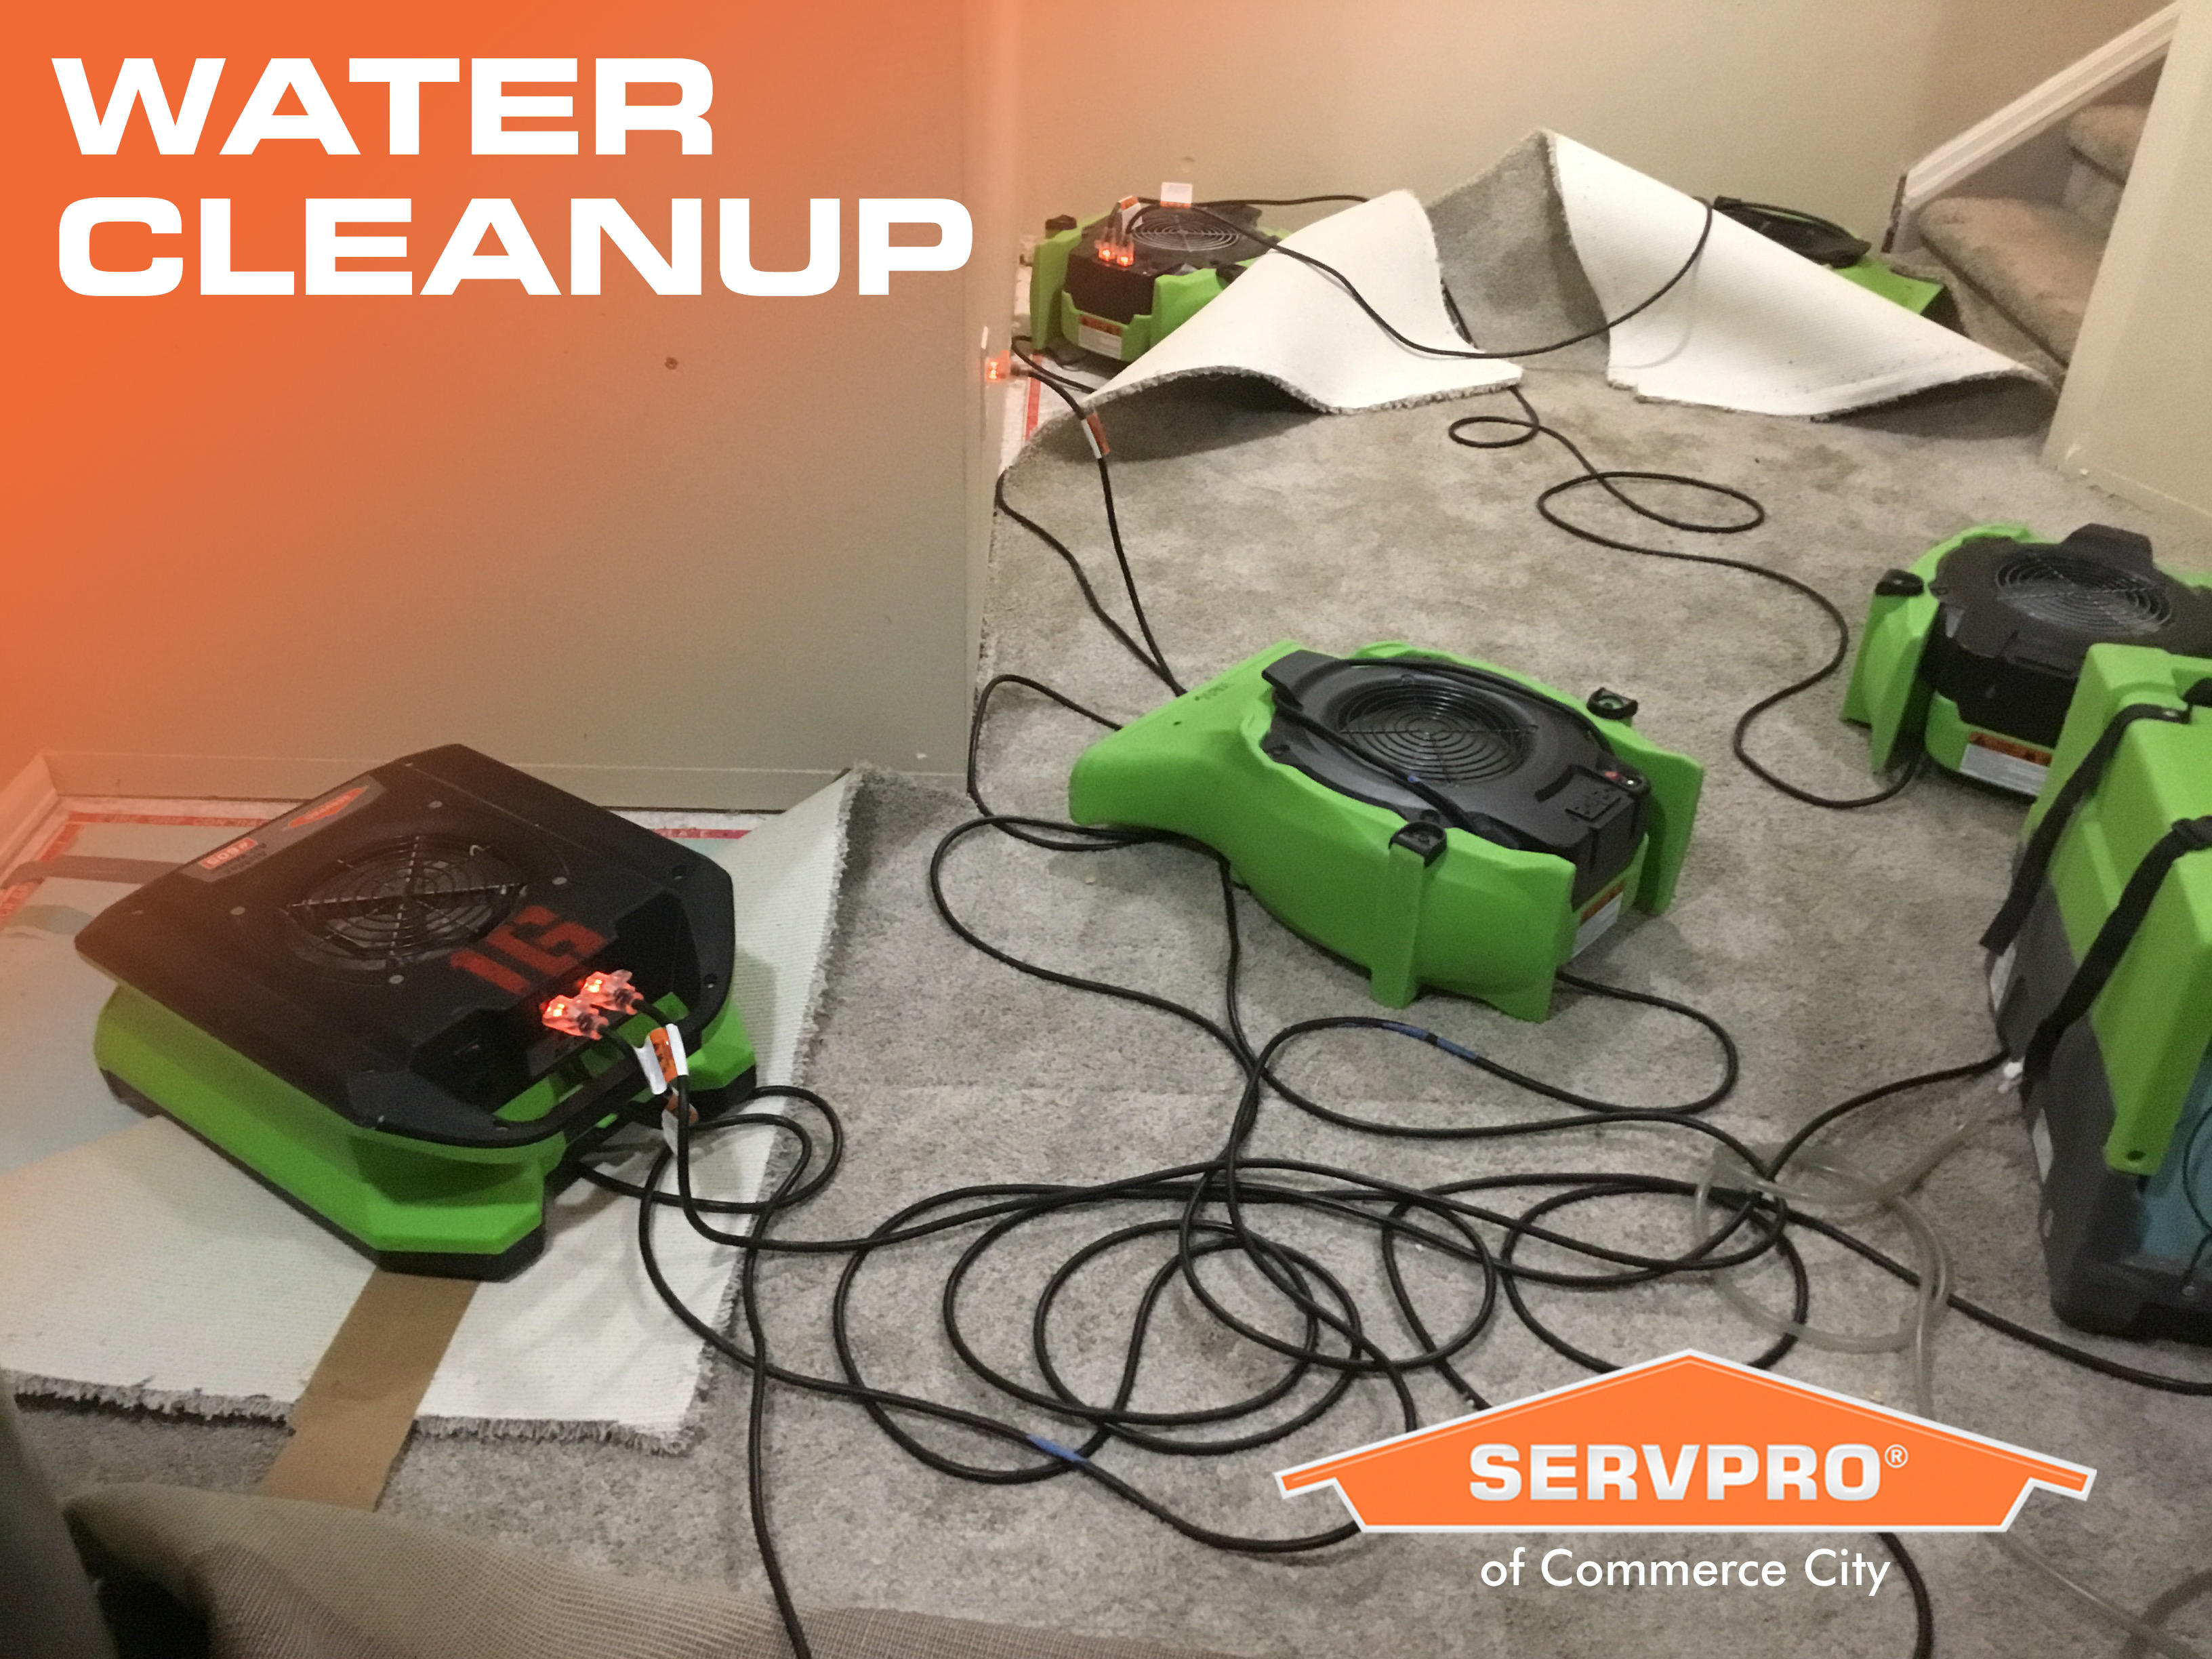 Water damage can be caused by flooding or water leaks and even storm damage.  We have the experience, expertise, and equipment to restore your property properly.